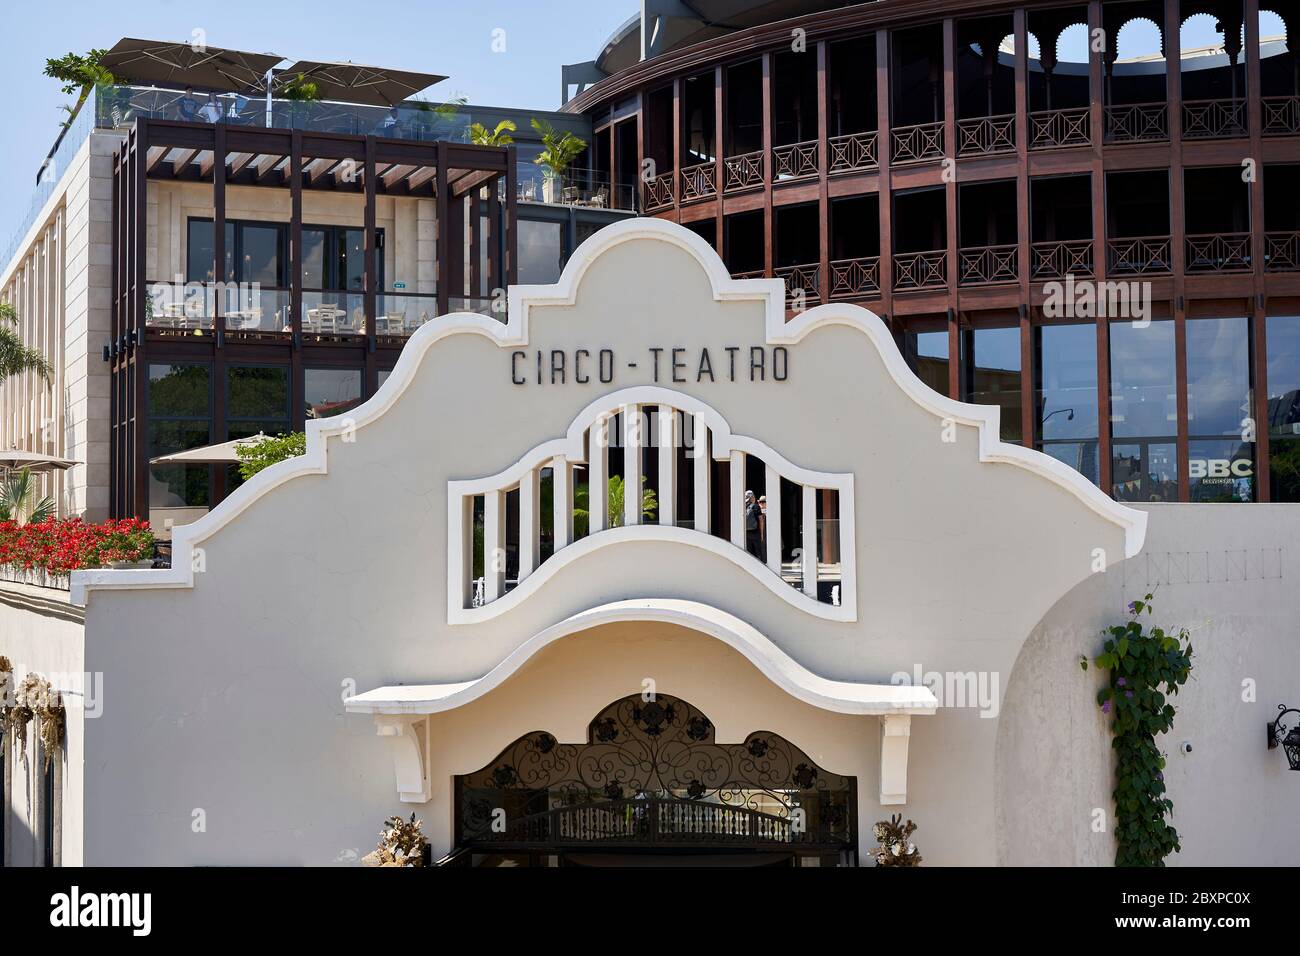 Ciro Teatro former bull ring from the surrounding wall of Cartagena, Colombia Stock Photo